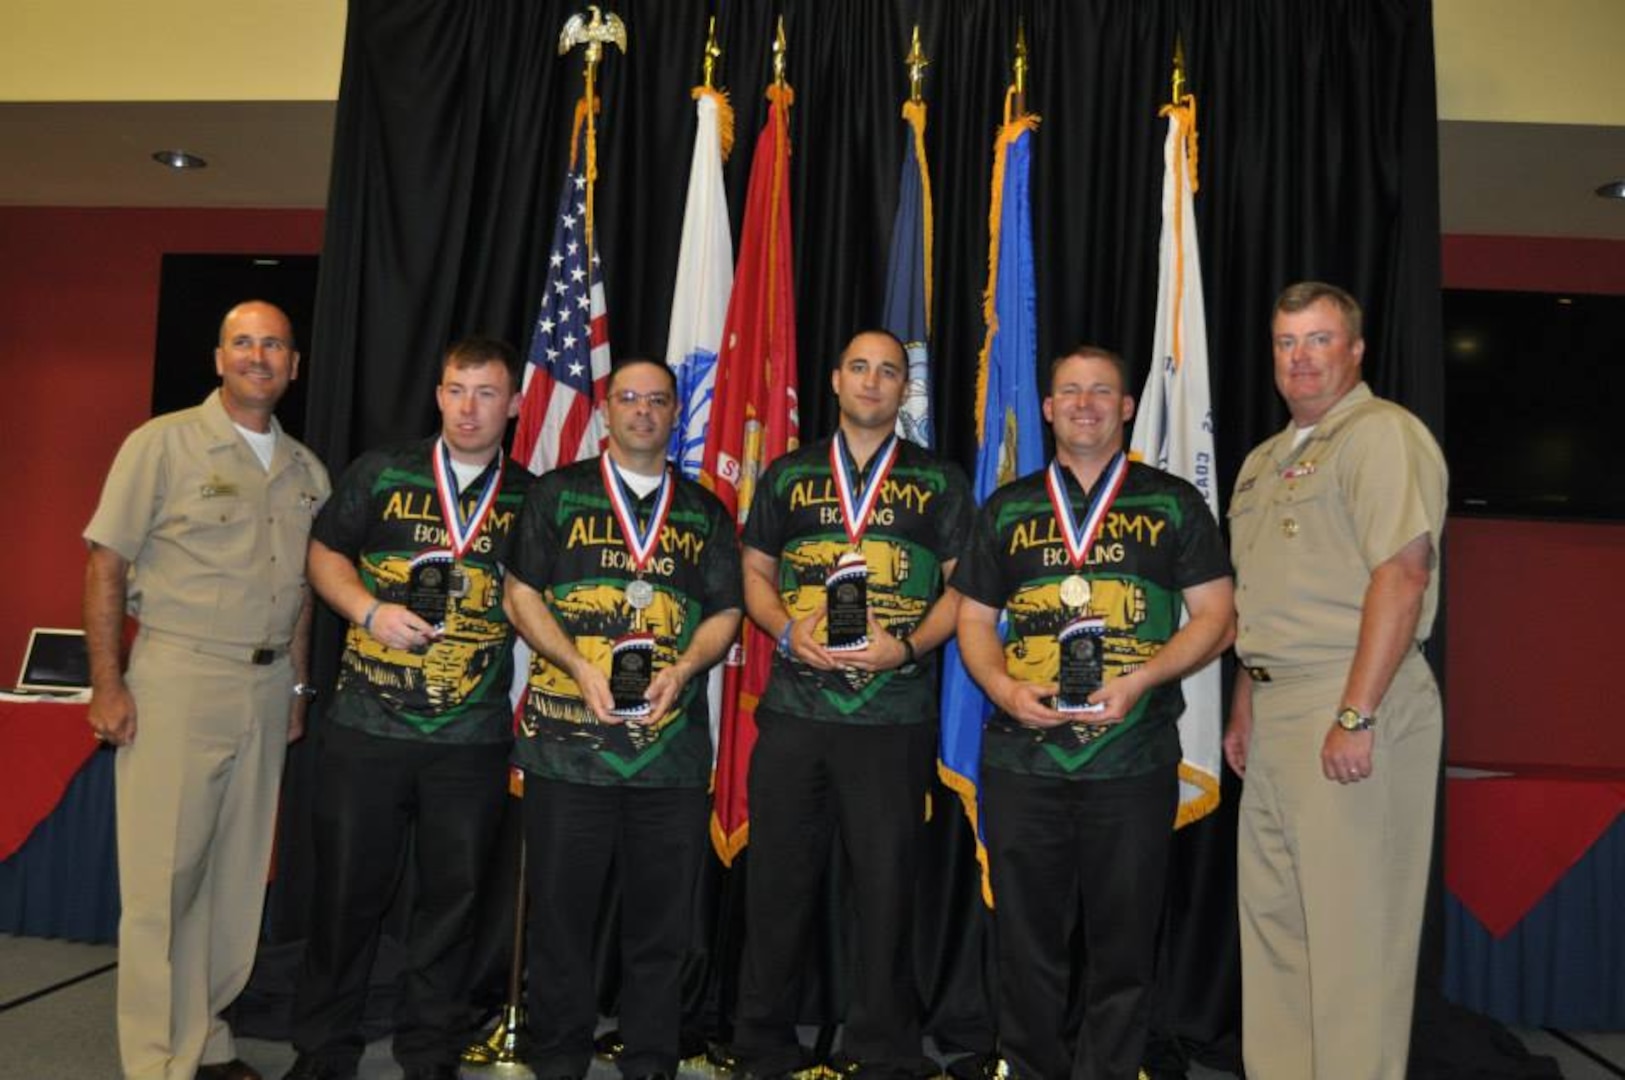 Army silver medal men's team at the 2015 Armed Forces Bowling Championship held at NAS Jacksonville, Fla. from 11-18 May